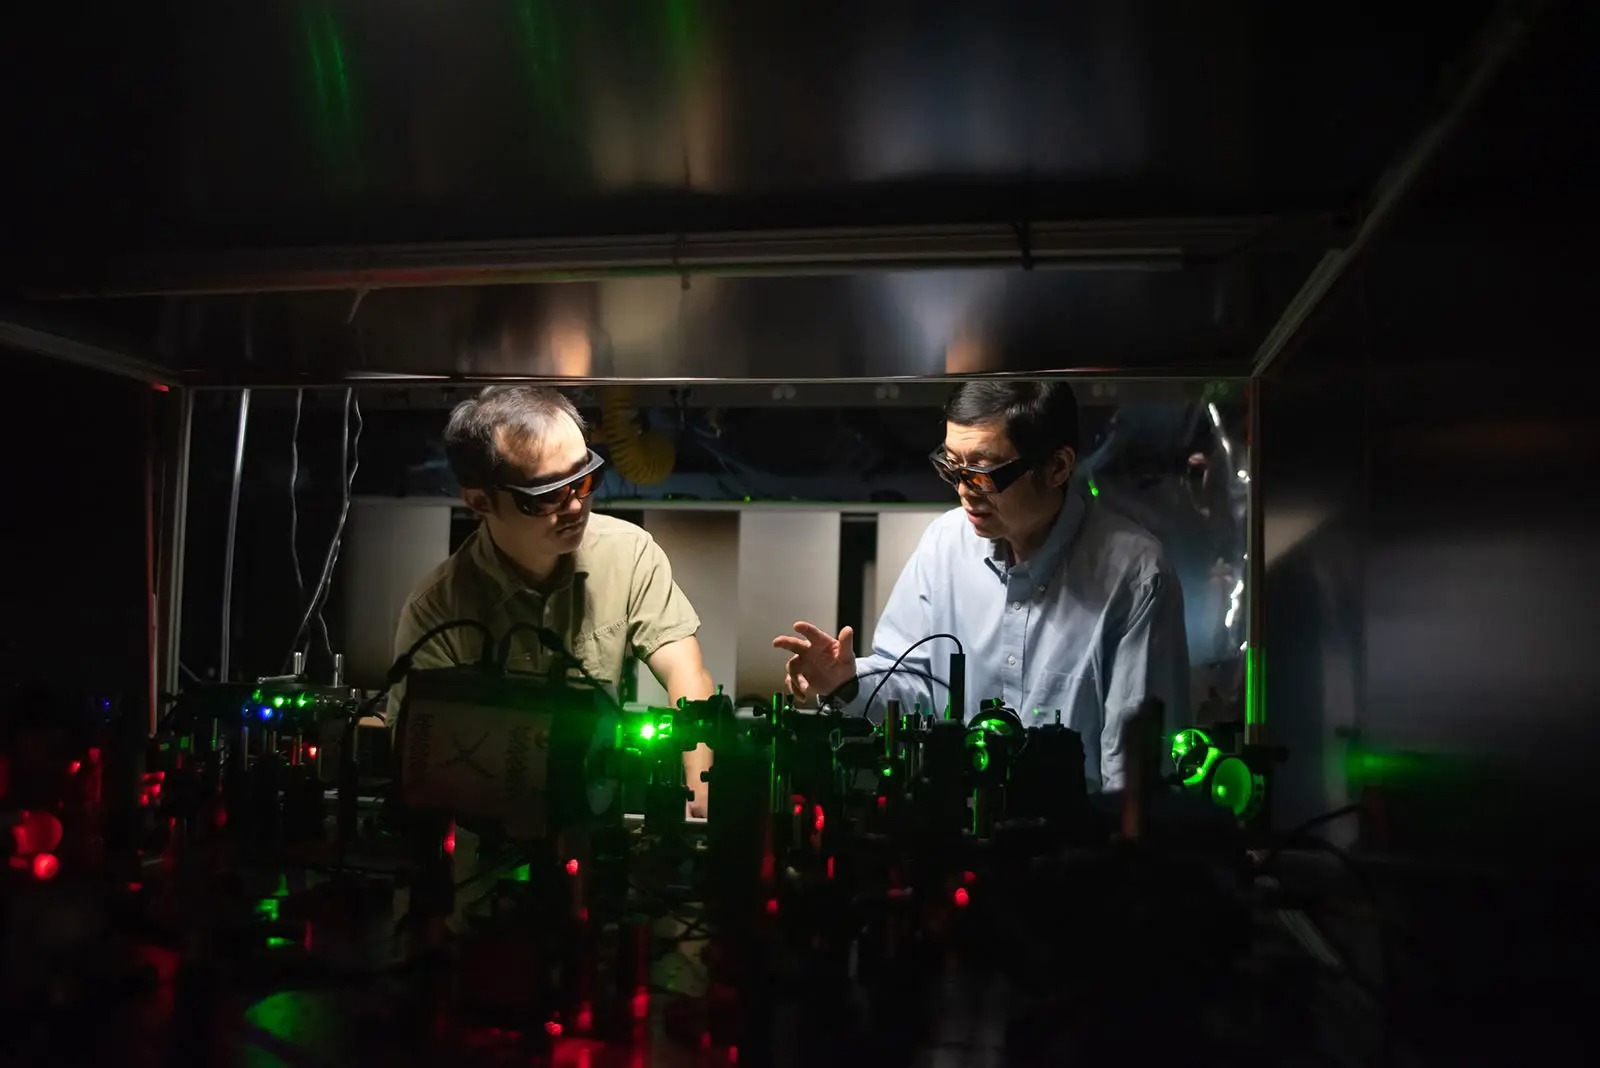 Quantum tricks have taken microscopy to a higher level